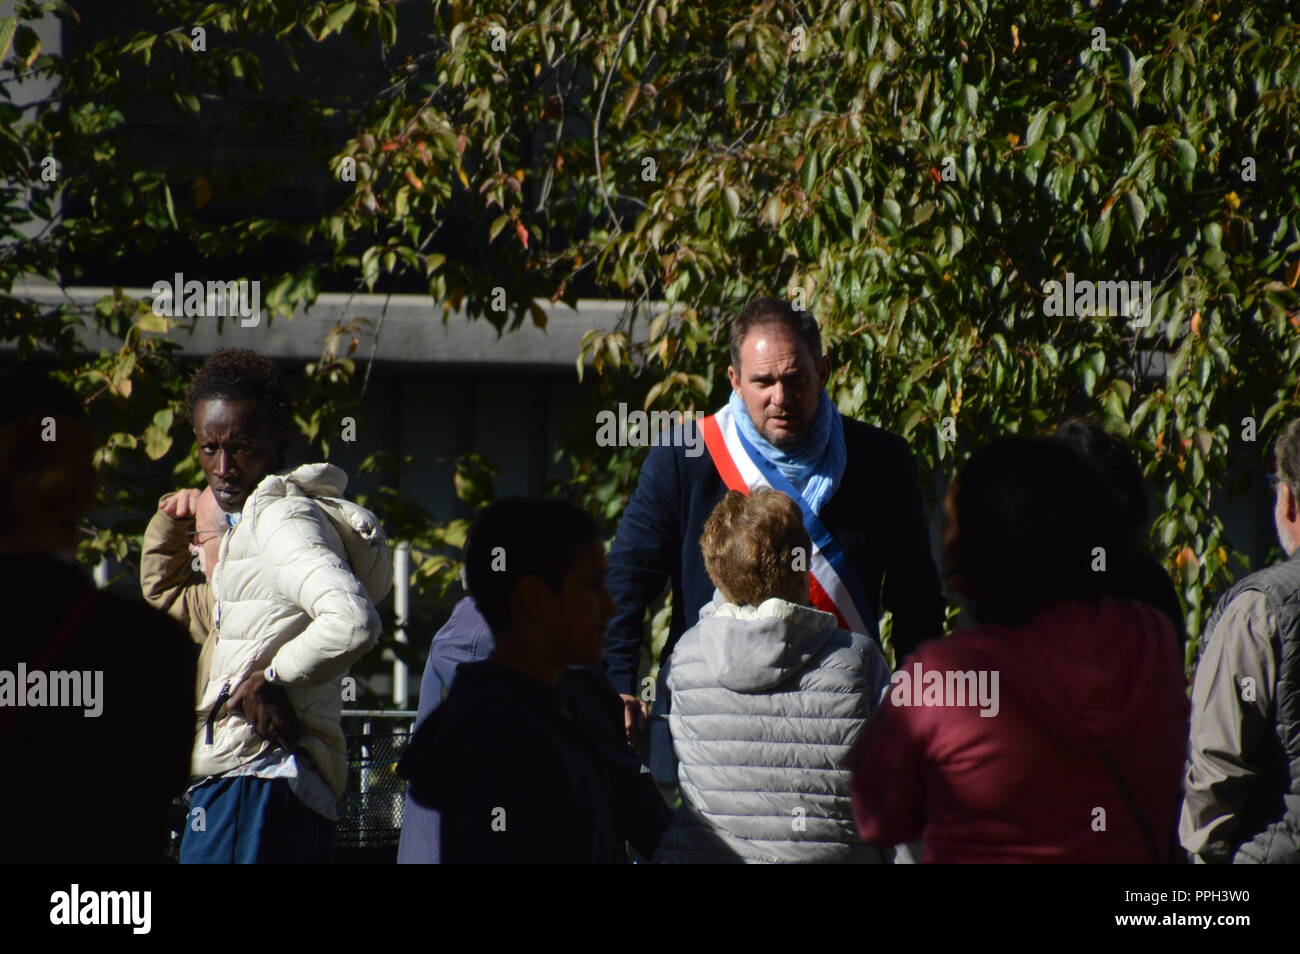 Paris, France. 26th Sept 2018. Illegal occupation.The mayor of Montreuil, Patrice Bessac (Paris suburb), illegally permits to migrants to be housed in unoccupied building of a centre of formation AFPA, just near the city hall. Police forces present. 26 september 2018  ALPHACIT NEWIM / Alamy Live News Stock Photo